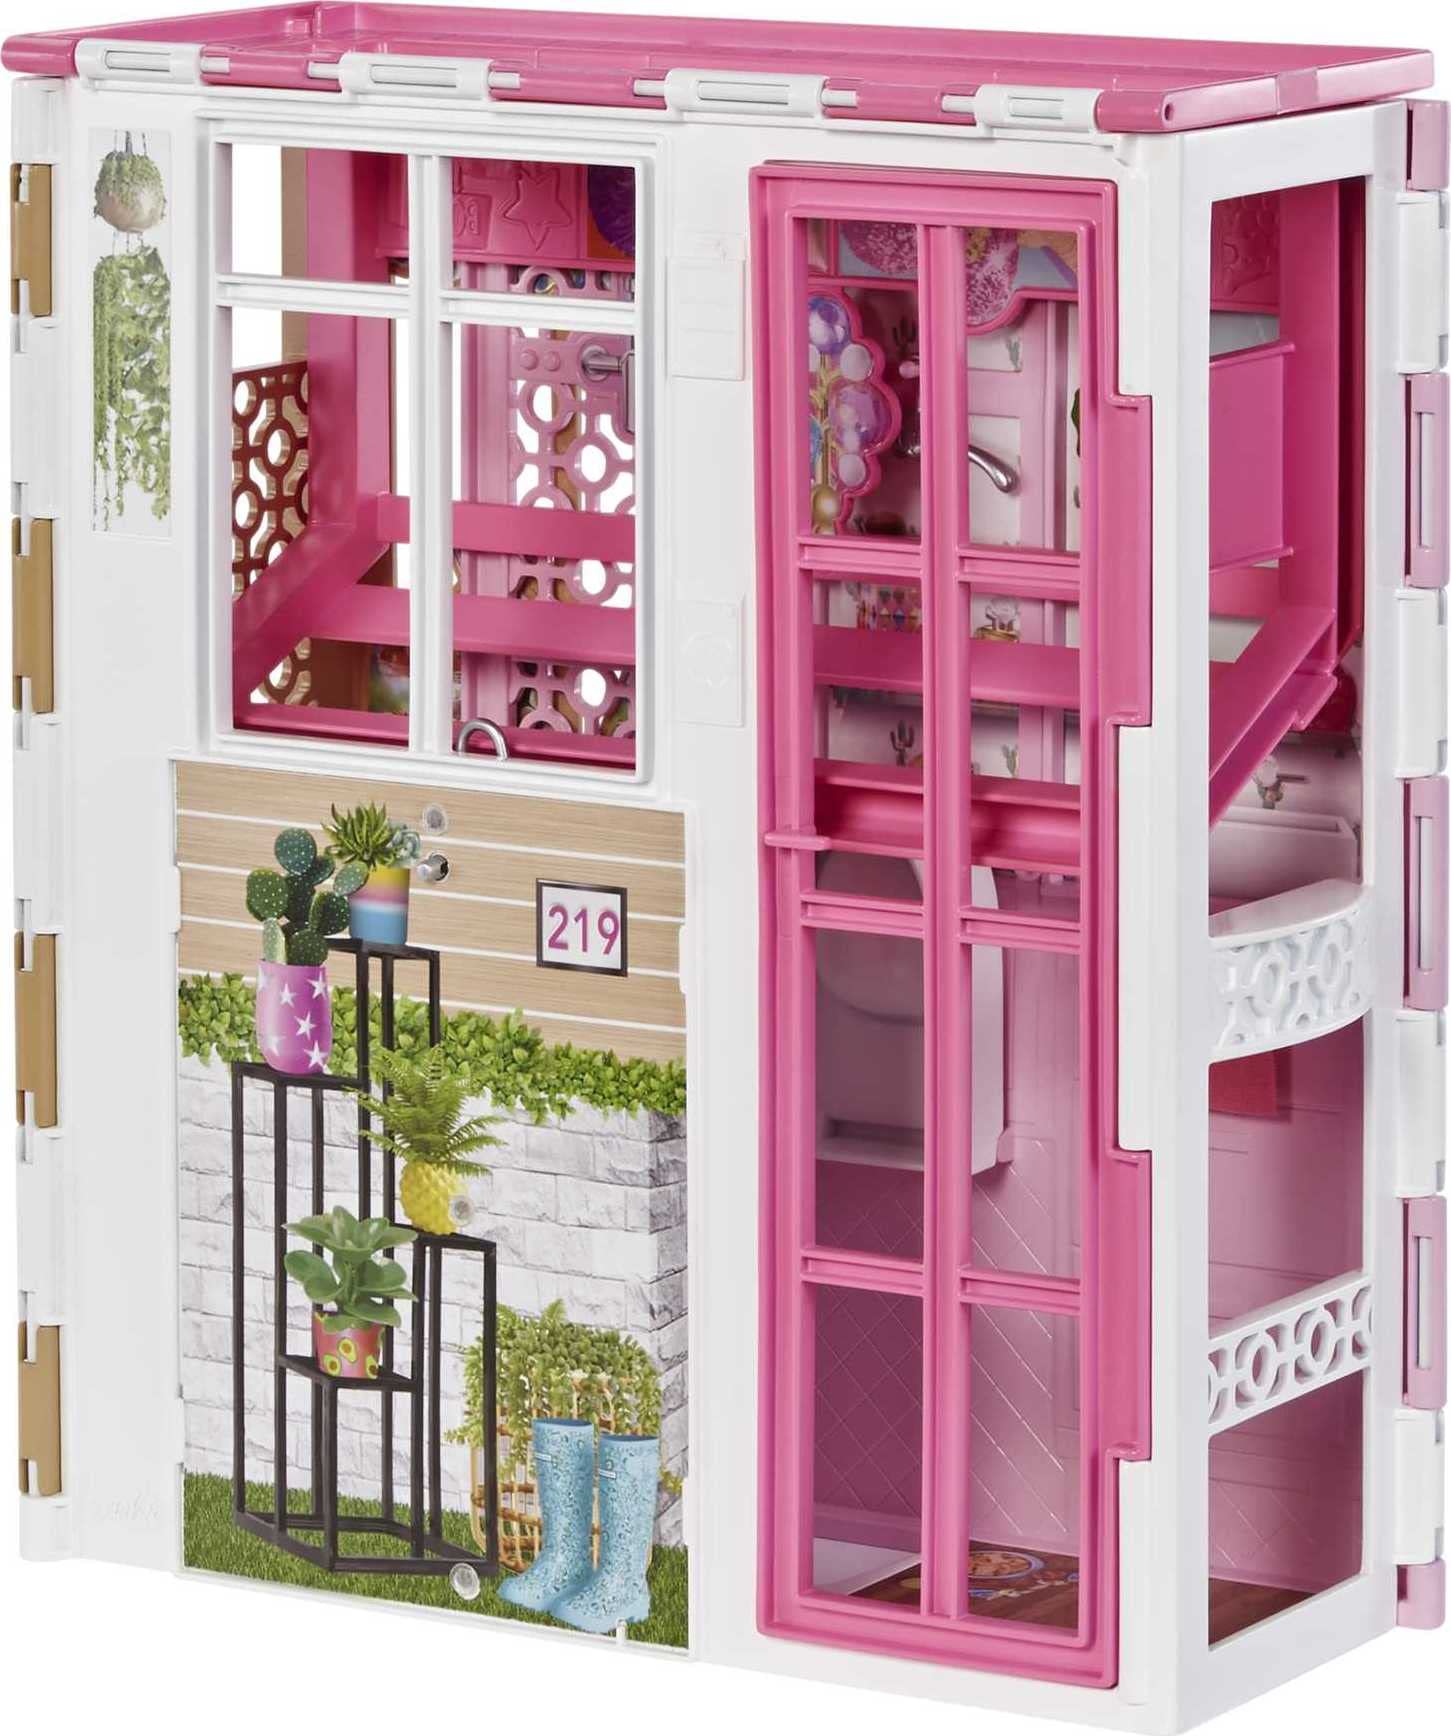 Barbie Doll House with Furniture & Accessories Including Pet Puppy, 4 Play Areas (Kitchen, Loft Bed, Bathroom & Dining Room) Small